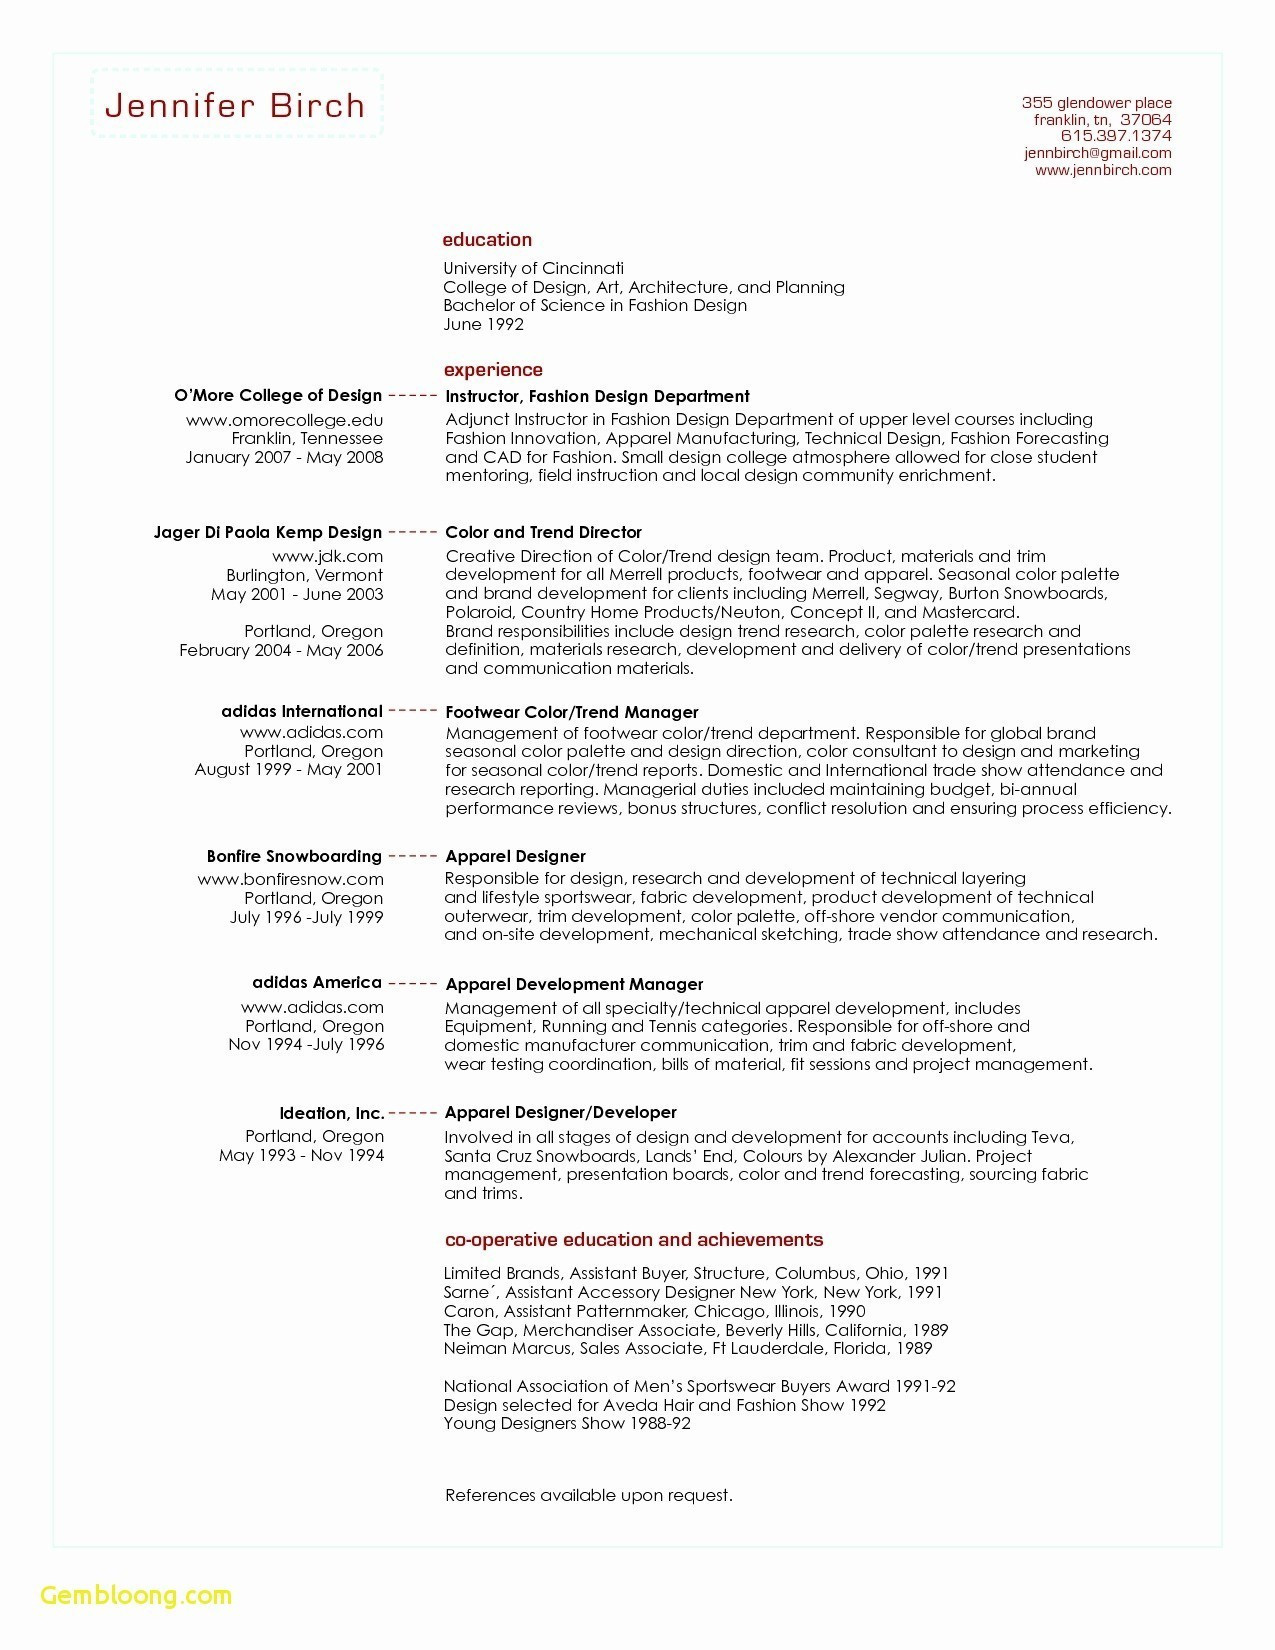 Examples Of Objectives For Resumes Sample Of Objective For Resume Examples Sample Objectives For Resumes Inspirational Objective Resume Of Sample Of Objective For Resume examples of objectives for resumes|wikiresume.com